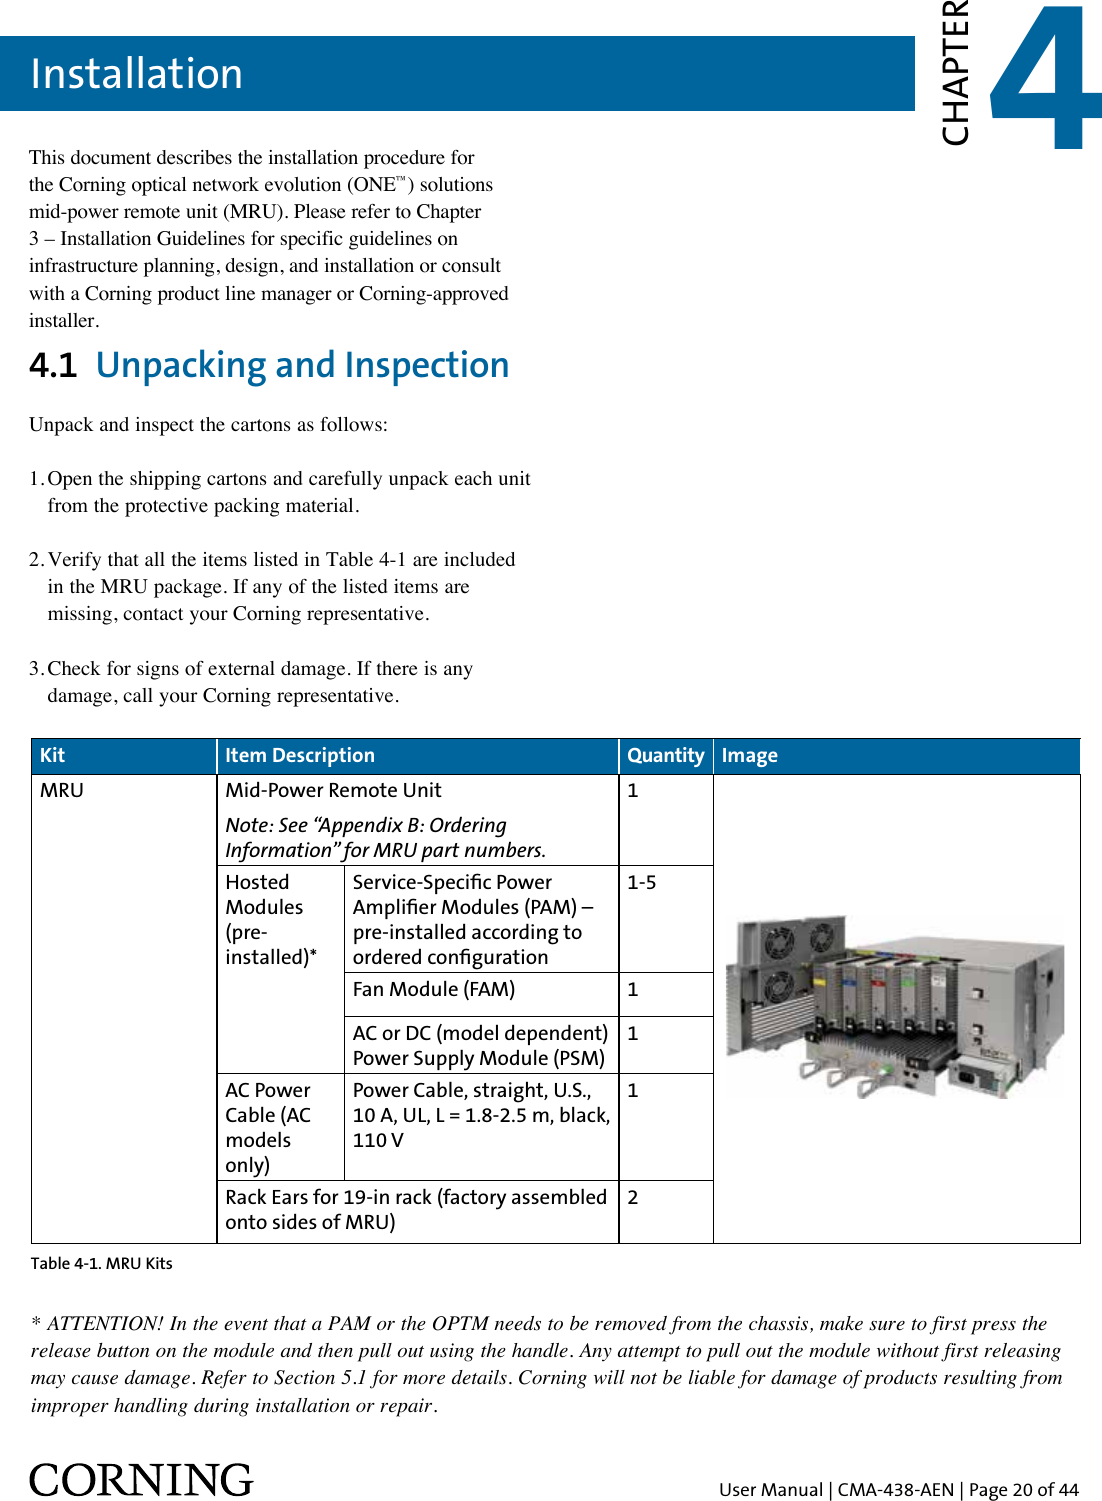 User Manual | CMA-438-AEN | Page 20 of 44Installation 4CHAPTERThis document describes the installation procedure for the Corning optical network evolution (ONE™) solutions mid-power remote unit (MRU). Please refer to Chapter 3 – Installation Guidelines for specific guidelines on infrastructure planning, design, and installation or consult with a Corning product line manager or Corning-approved installer.4.1  Unpacking and InspectionUnpack and inspect the cartons as follows:1. Open the shipping cartons and carefully unpack each unit   from the protective packing material.2. Verify that all the items listed in Table 4-1 are included    in the MRU package. If any of the listed items are    missing, contact your Corning representative. 3. Check for signs of external damage. If there is any    damage, call your Corning representative.Kit Item Description Quantity ImageMRU Mid-Power Remote UnitNote: See “Appendix B: Ordering Information” for MRU part numbers.1Hosted Modules (pre-installed)*Service-Specic Power Amplier Modules (PAM) – pre-installed according to ordered conguration1-5Fan Module (FAM) 1AC or DC (model dependent) Power Supply Module (PSM)1AC Power Cable (AC models only)Power Cable, straight, U.S., 10 A, UL, L = 1.8-2.5 m, black, 110 V1Rack Ears for 19-in rack (factory assembled onto sides of MRU)2Table 4-1. MRU Kits* ATTENTION! In the event that a PAM or the OPTM needs to be removed from the chassis, make sure to first press the release button on the module and then pull out using the handle. Any attempt to pull out the module without first releasing may cause damage. Refer to Section 5.1 for more details. Corning will not be liable for damage of products resulting from improper handling during installation or repair.